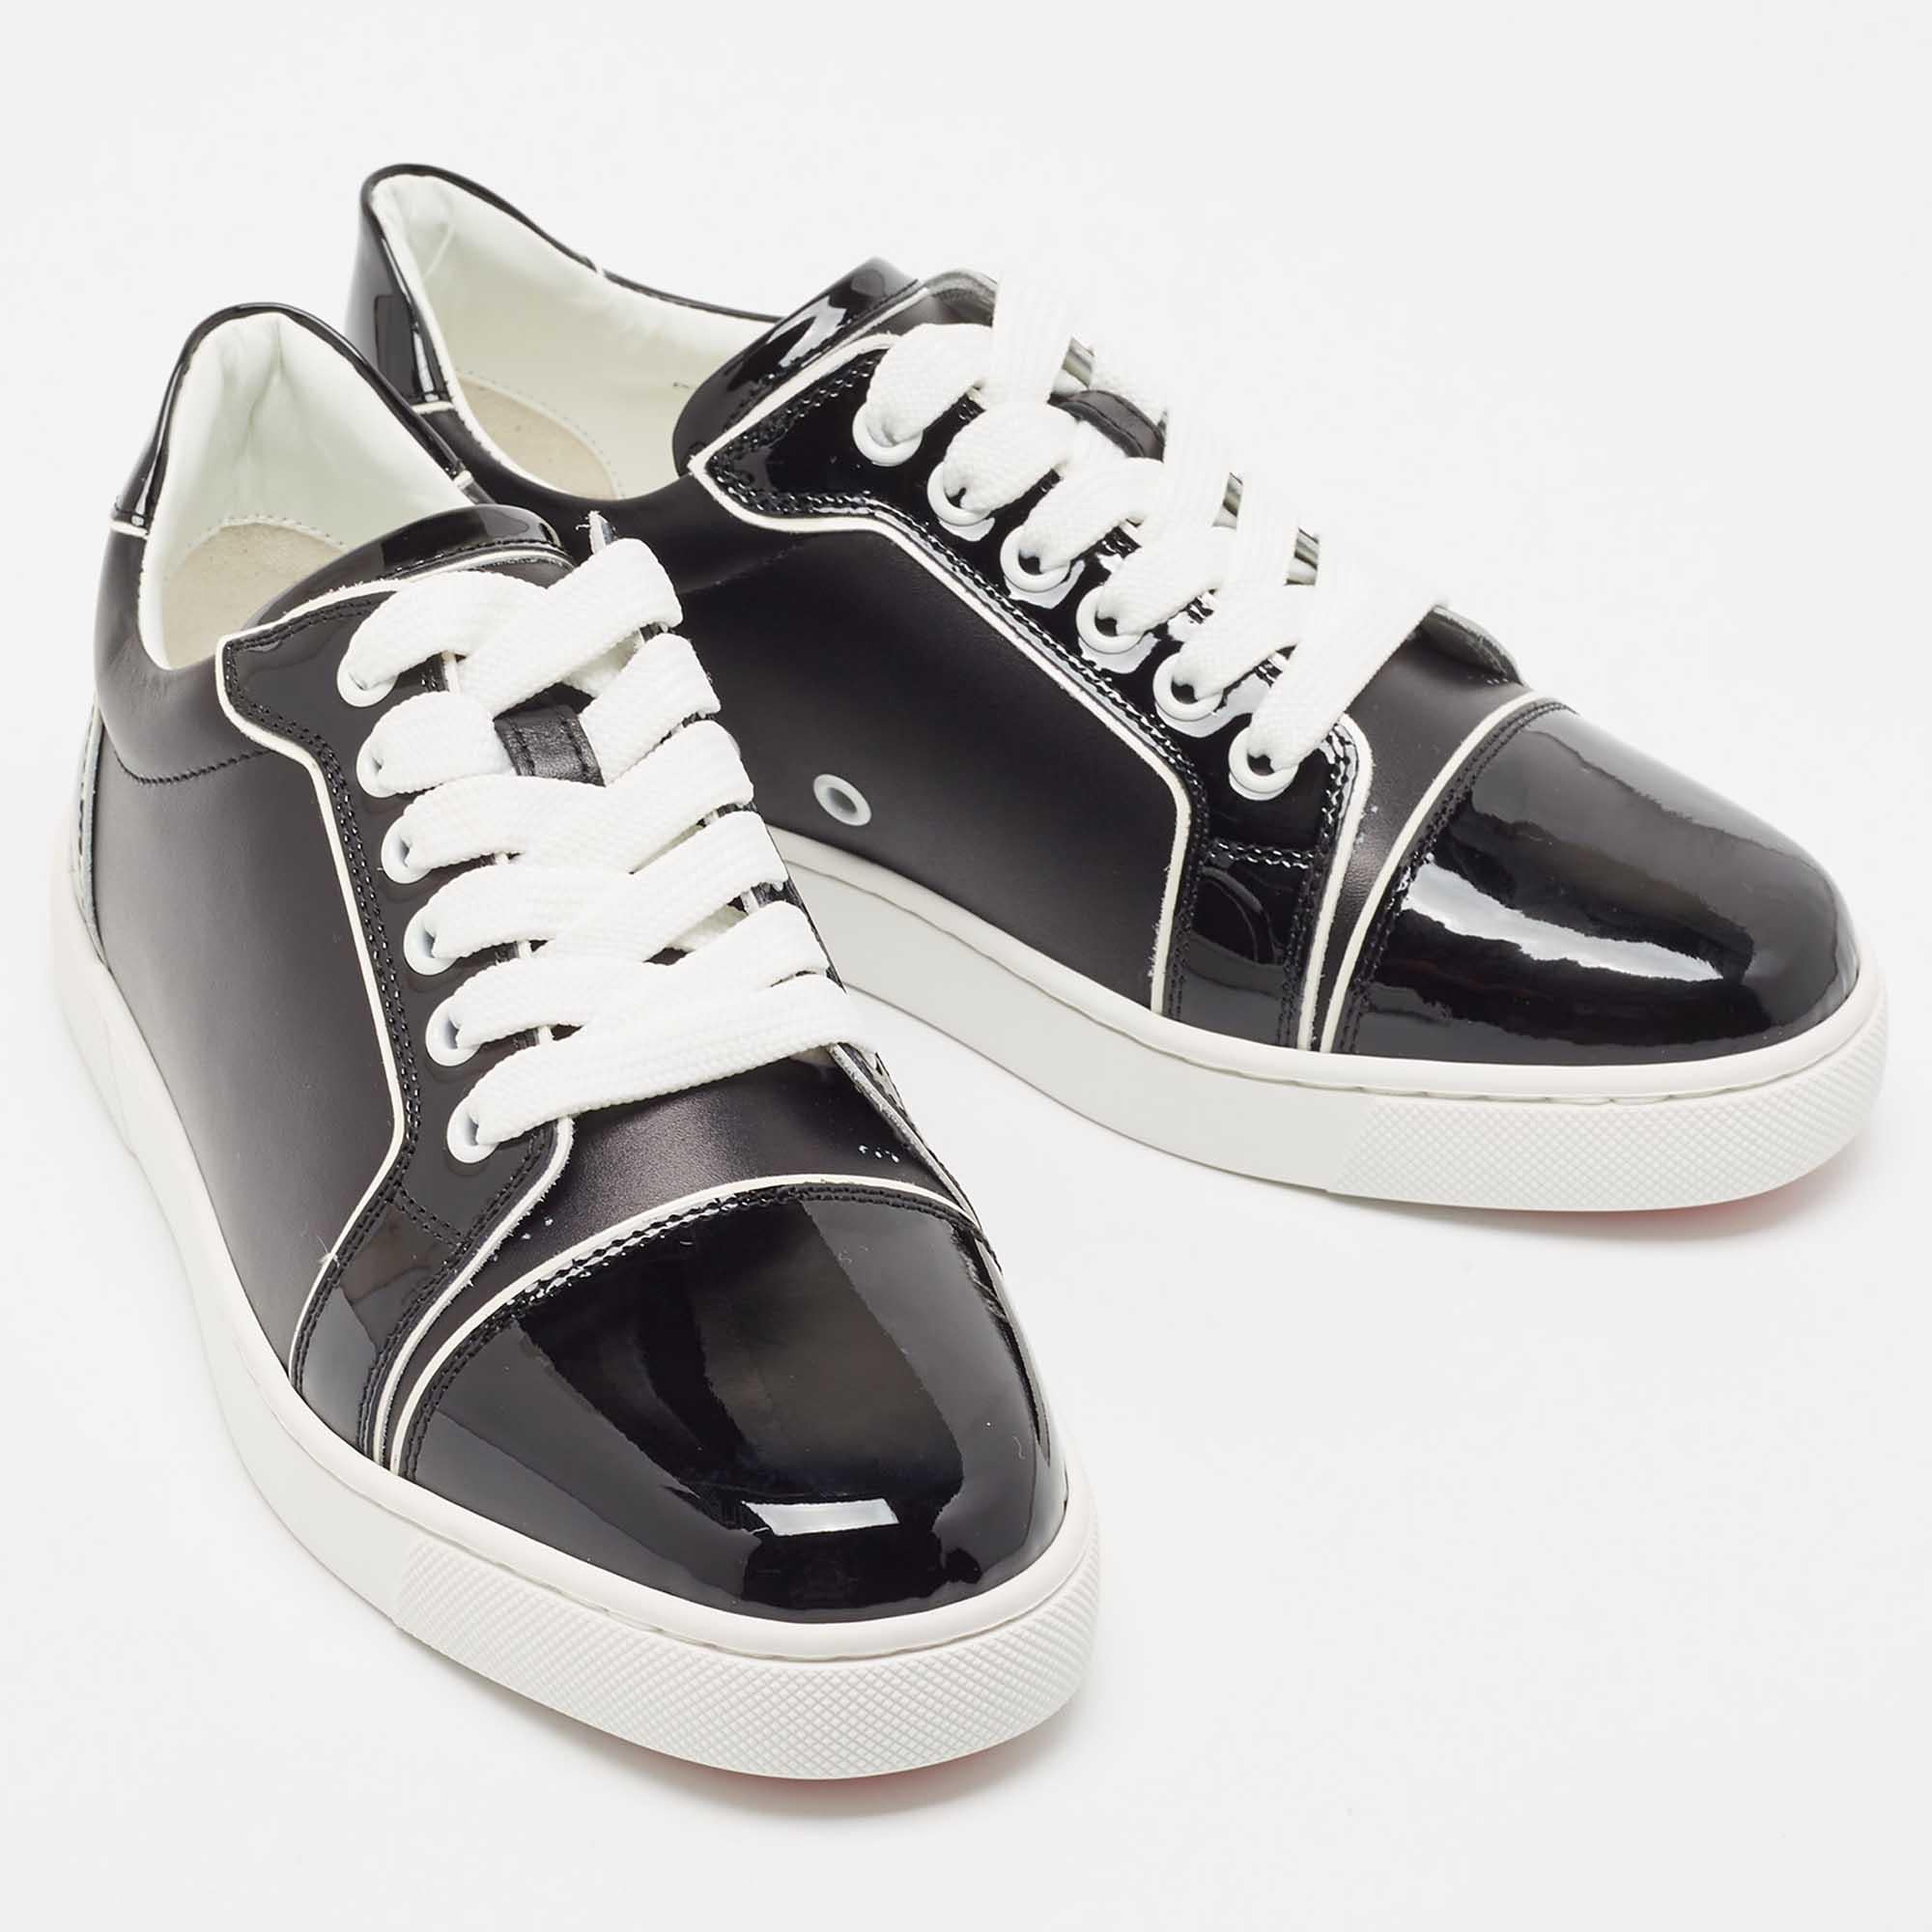 Christian Louboutin Black Patent and Leather Low Top Sneakers Size 36 For Sale 1